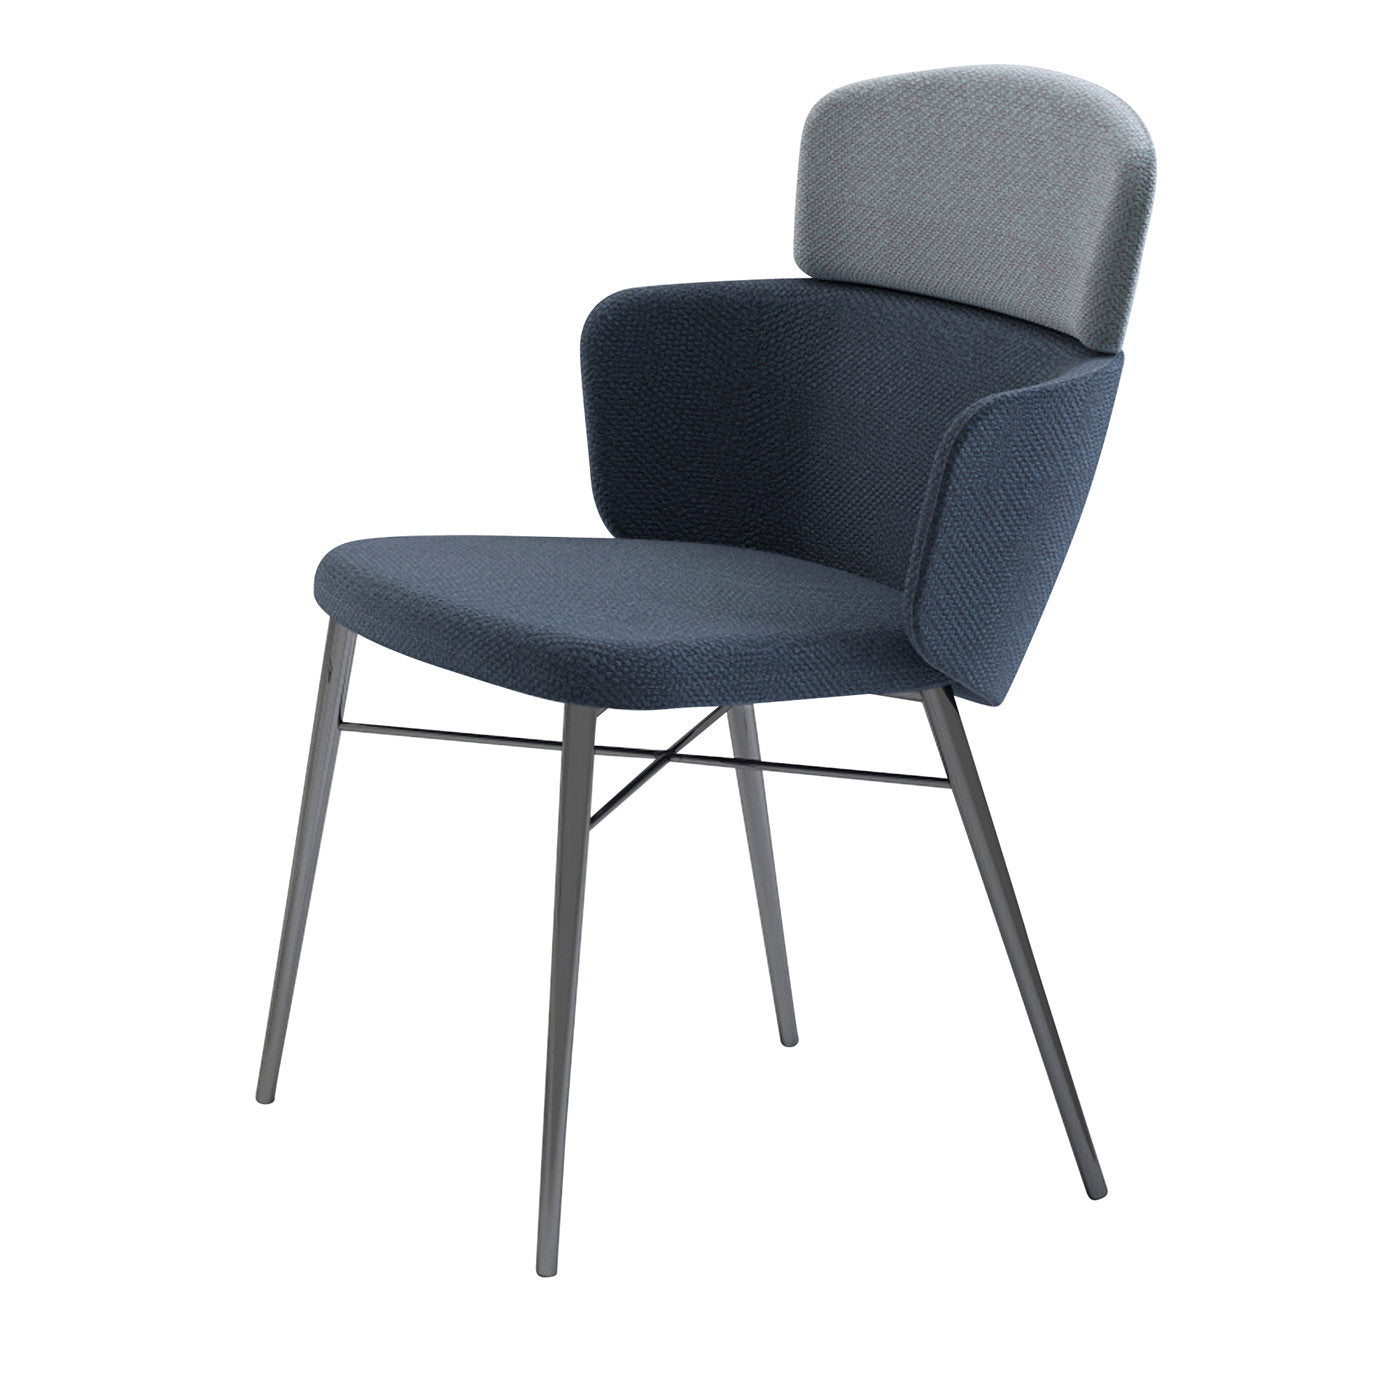 Kin Blue and Gray Chair with Armrests by Radice Orlandini - Main view